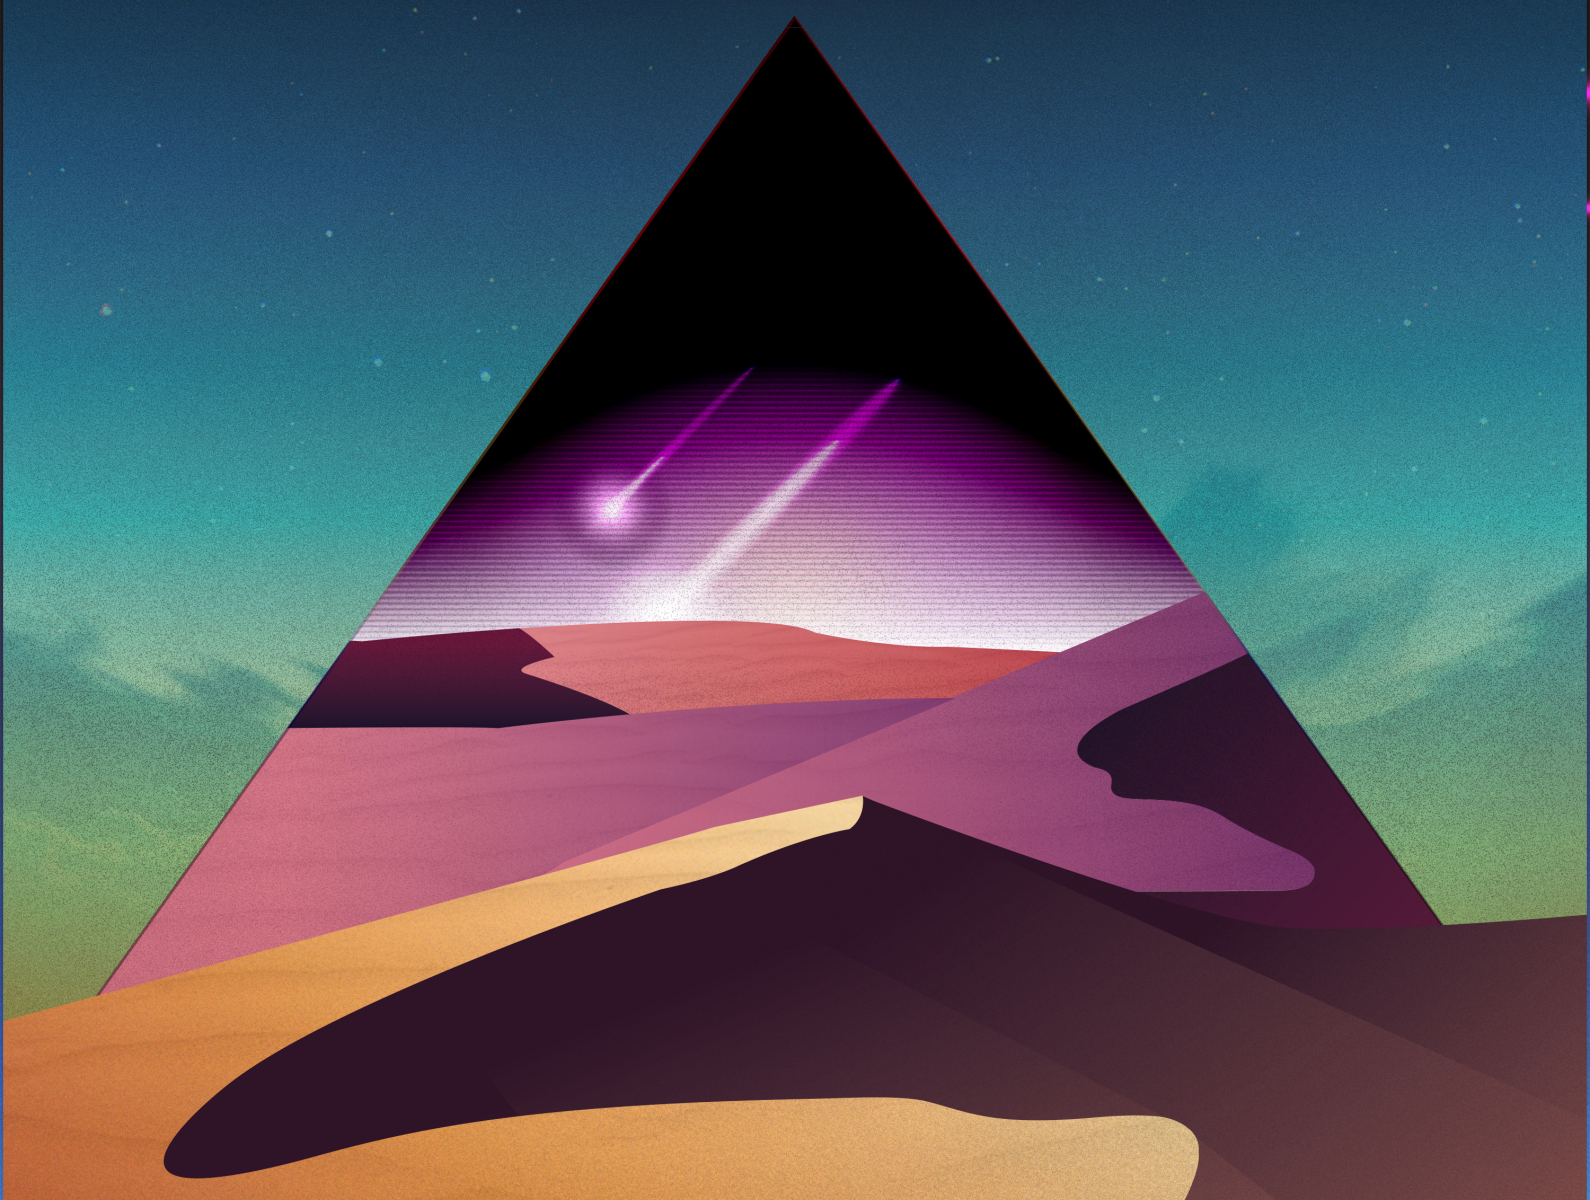 The Third pyramid by Zapdaraptor on Dribbble